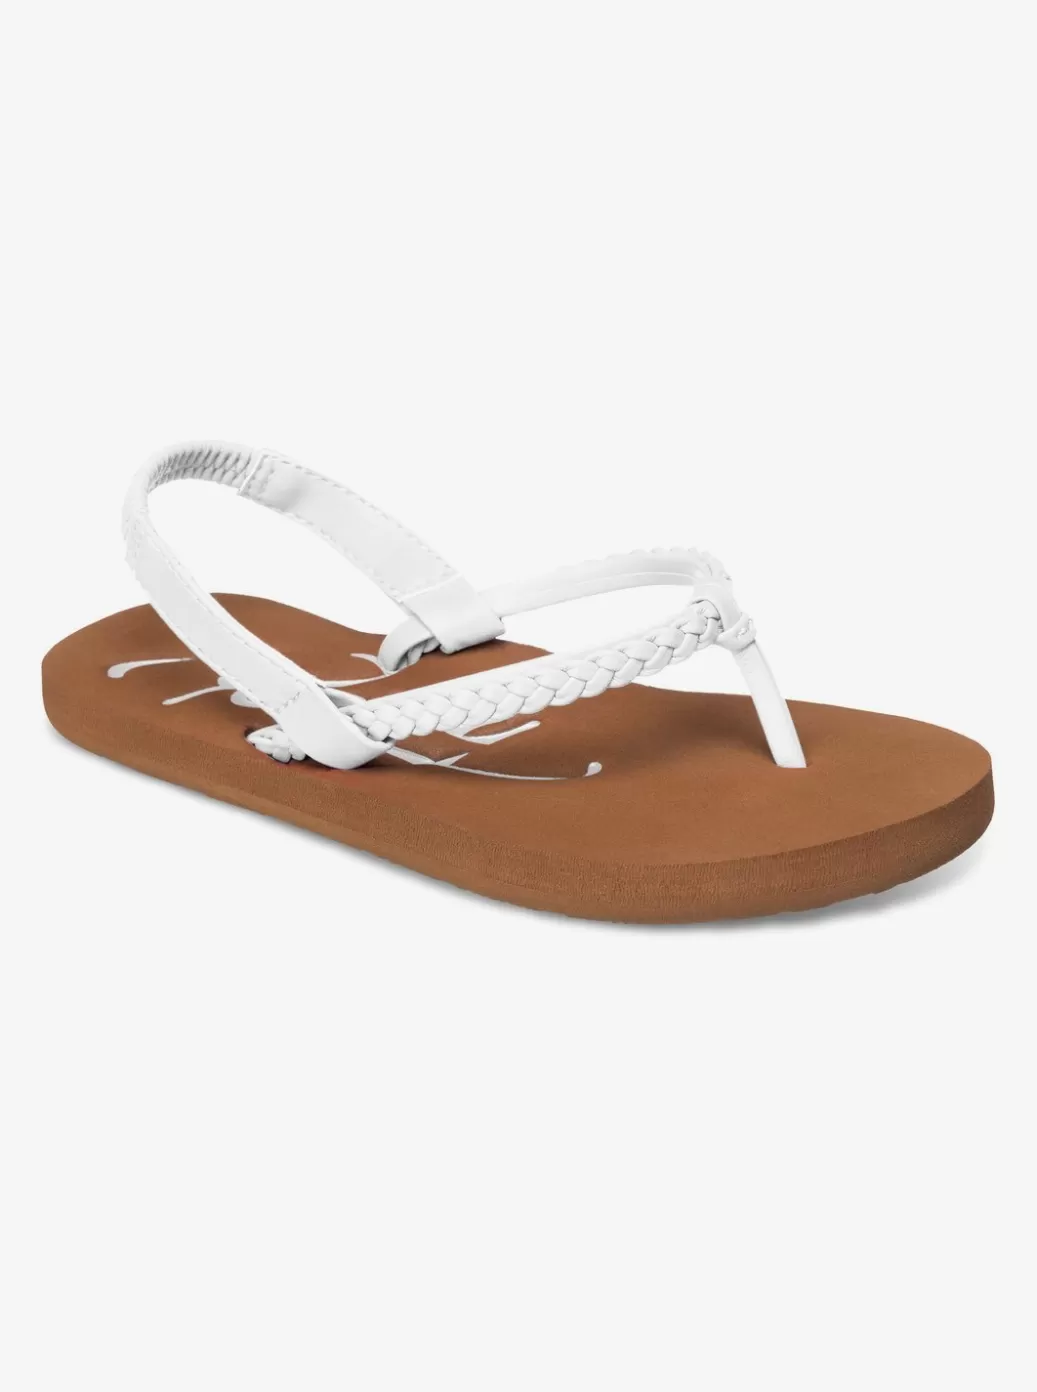 Shoes & Sandals | KIDS ROXY Girl's 2-7 Cabo Sandals White